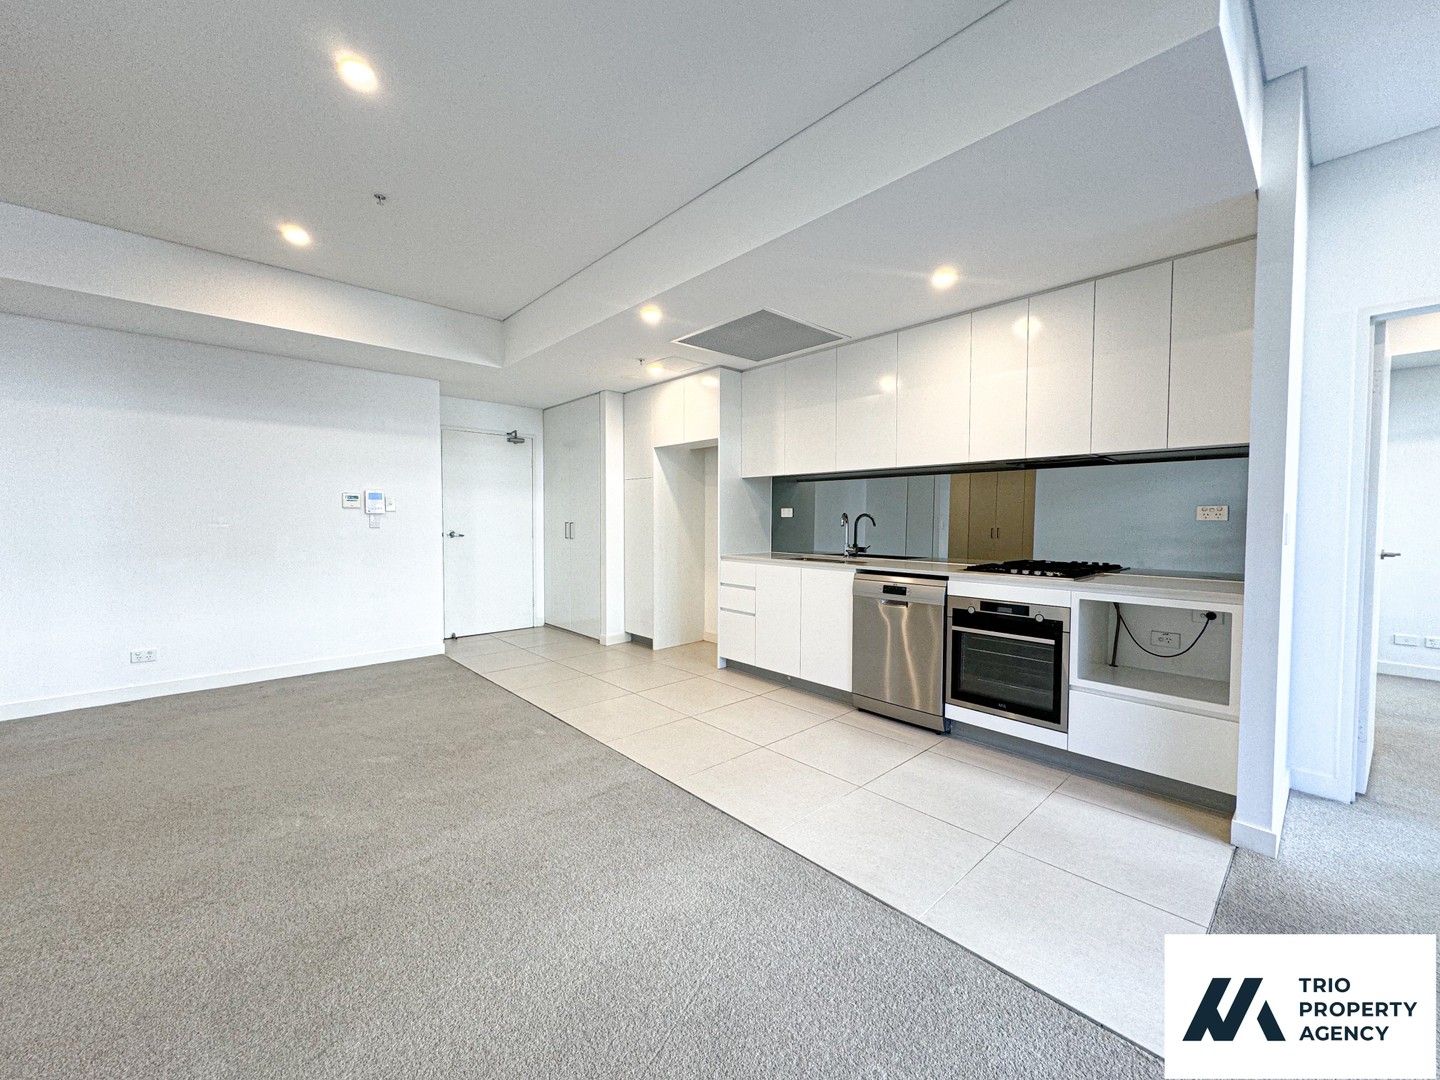 2 bedrooms Apartment / Unit / Flat in 102A/53 Nancarrow Avenue RYDE NSW, 2112